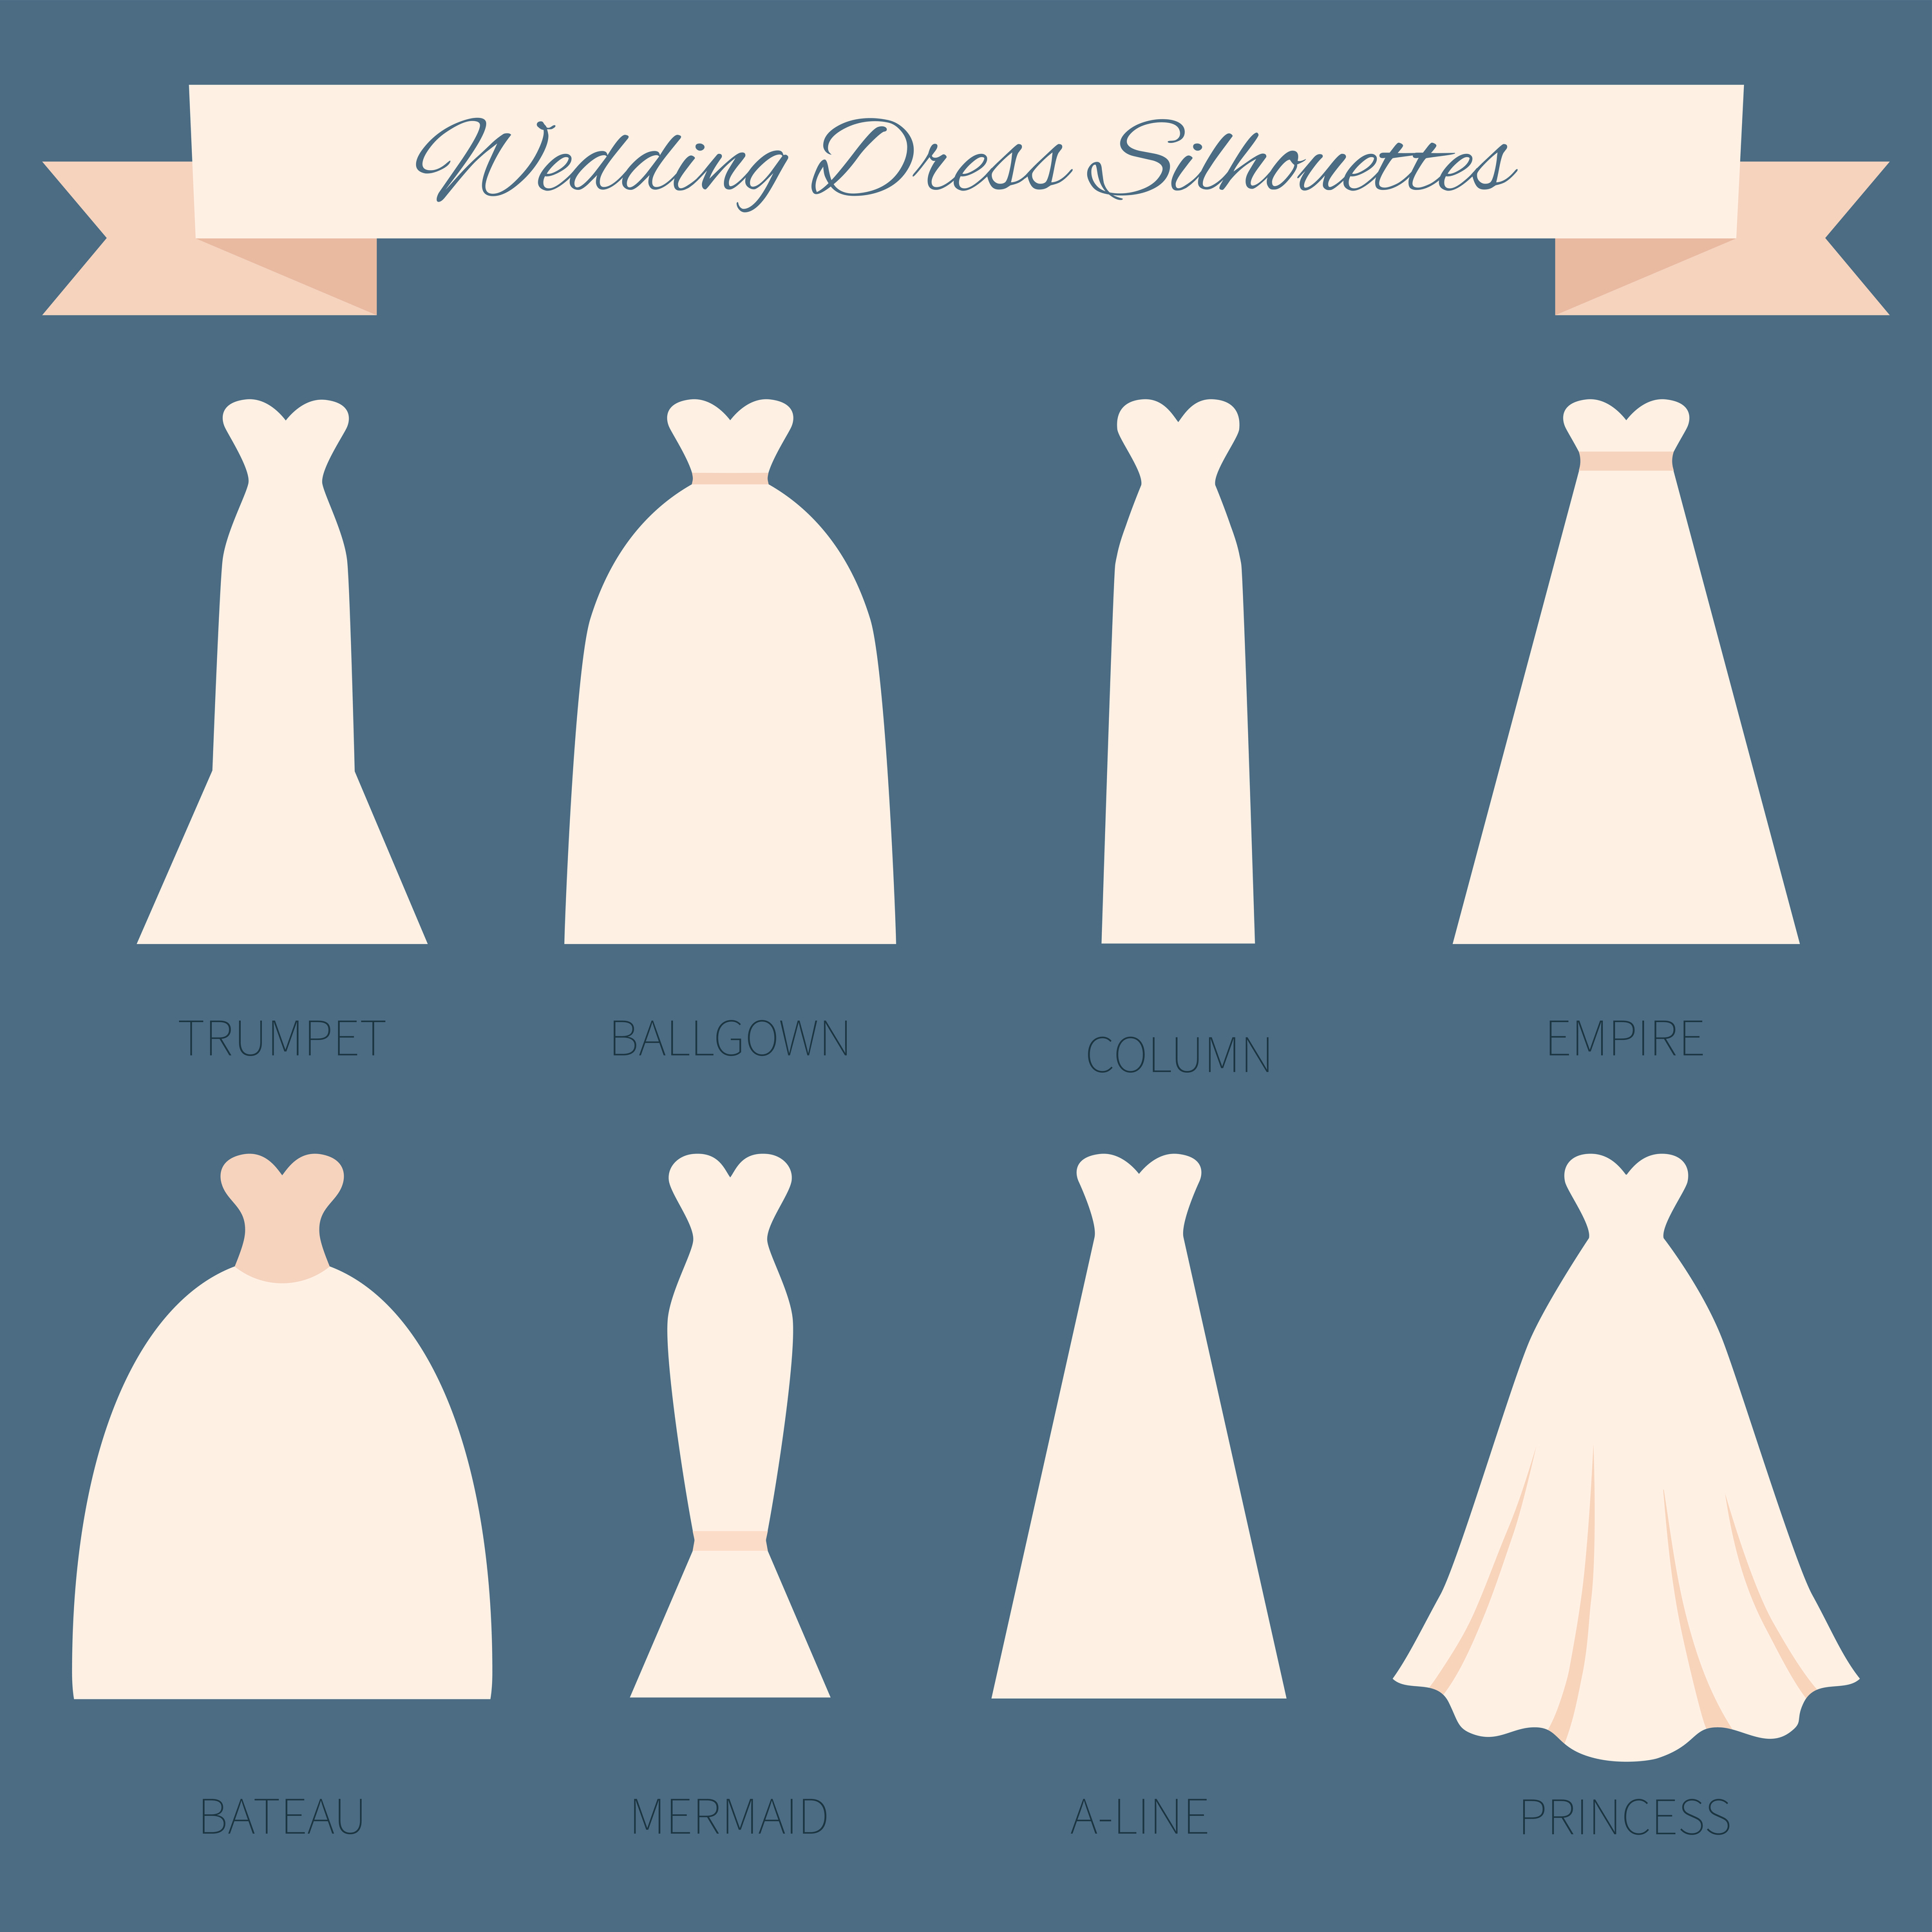 Gown styles and shapes - Which one is 